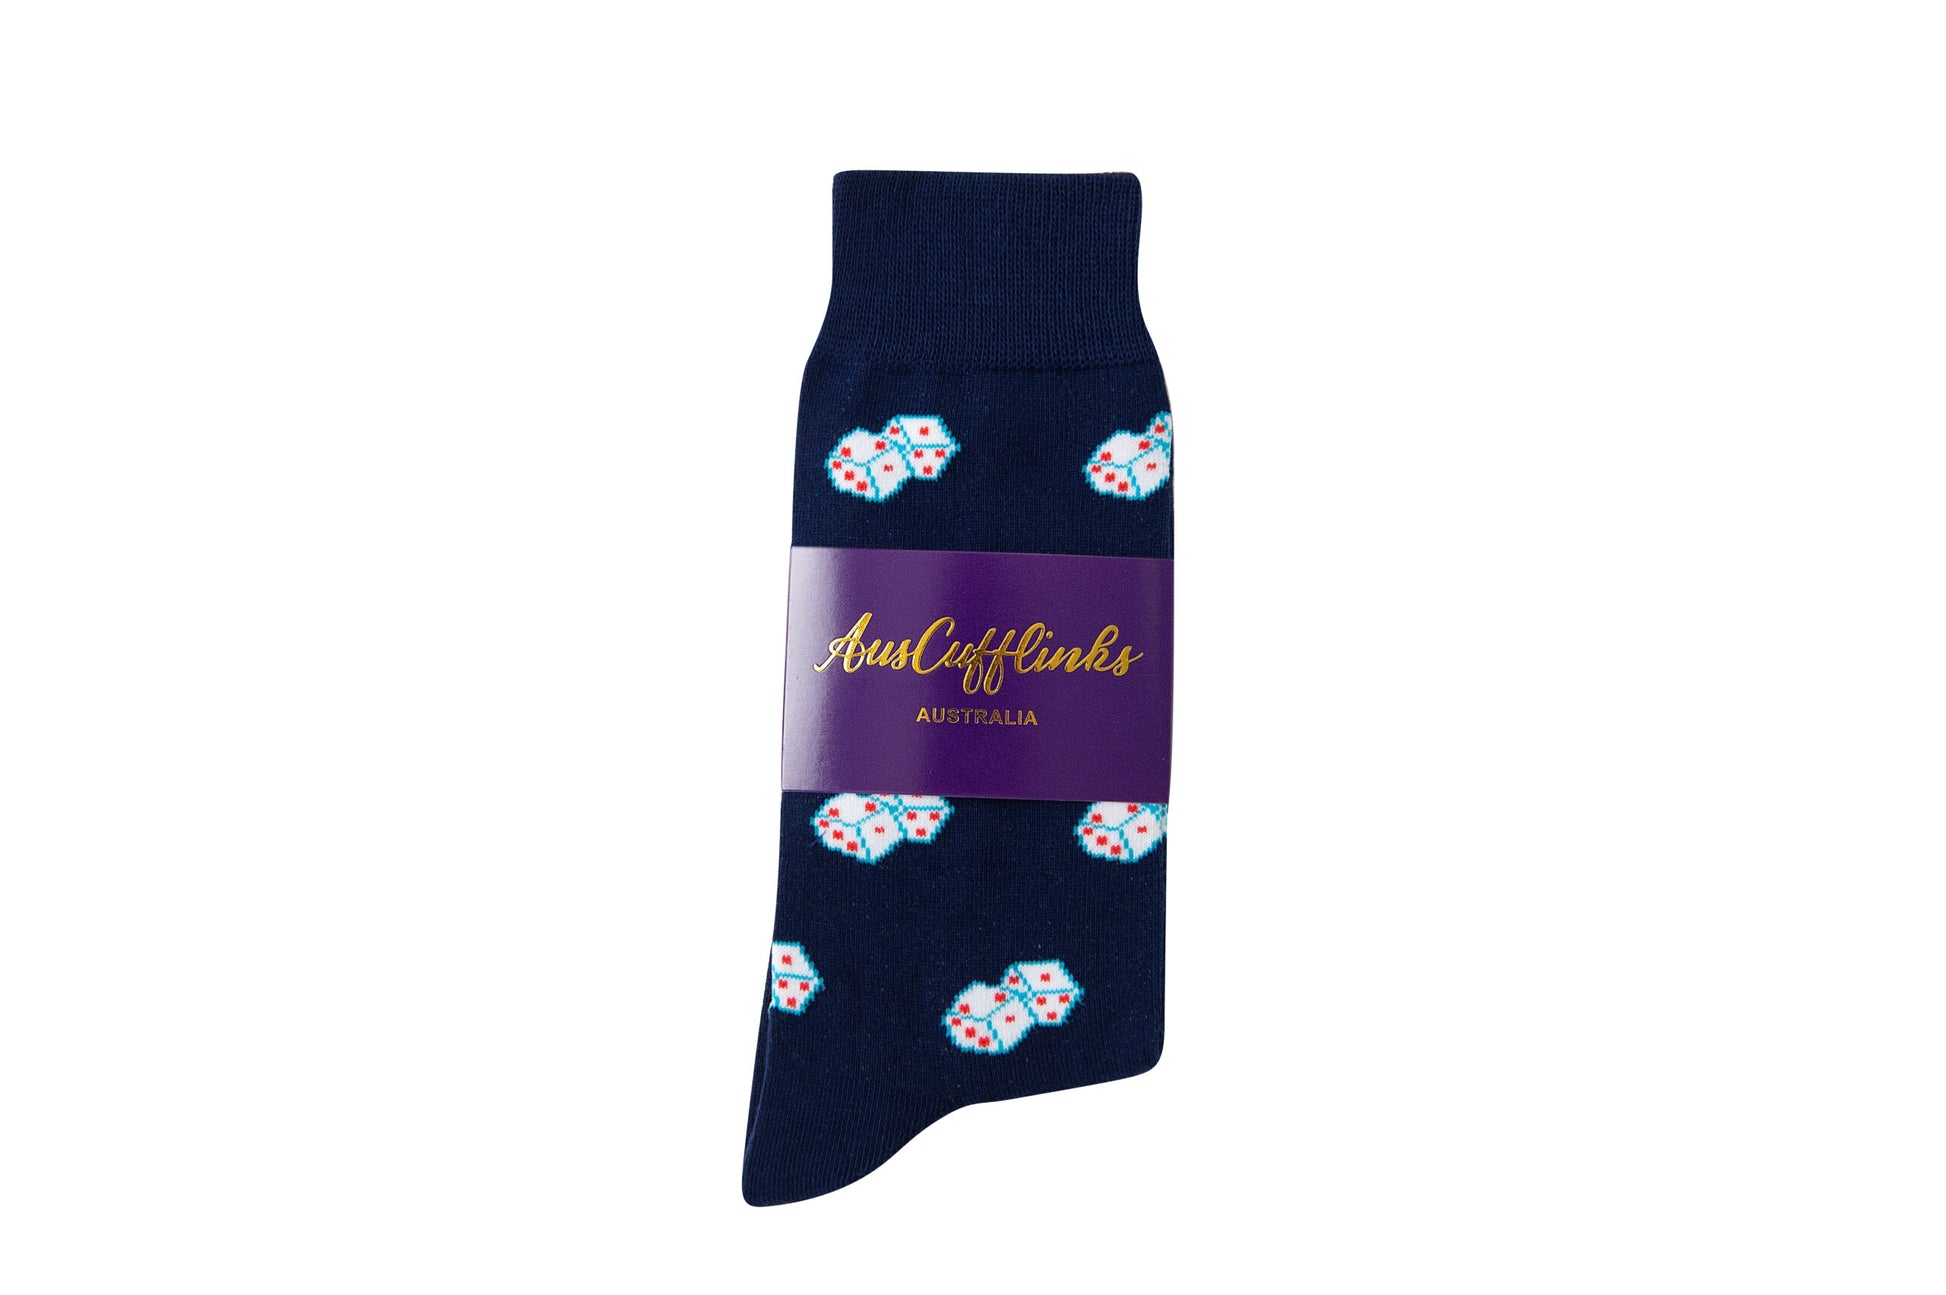 A Dice Sock with blue and white flowers on it.